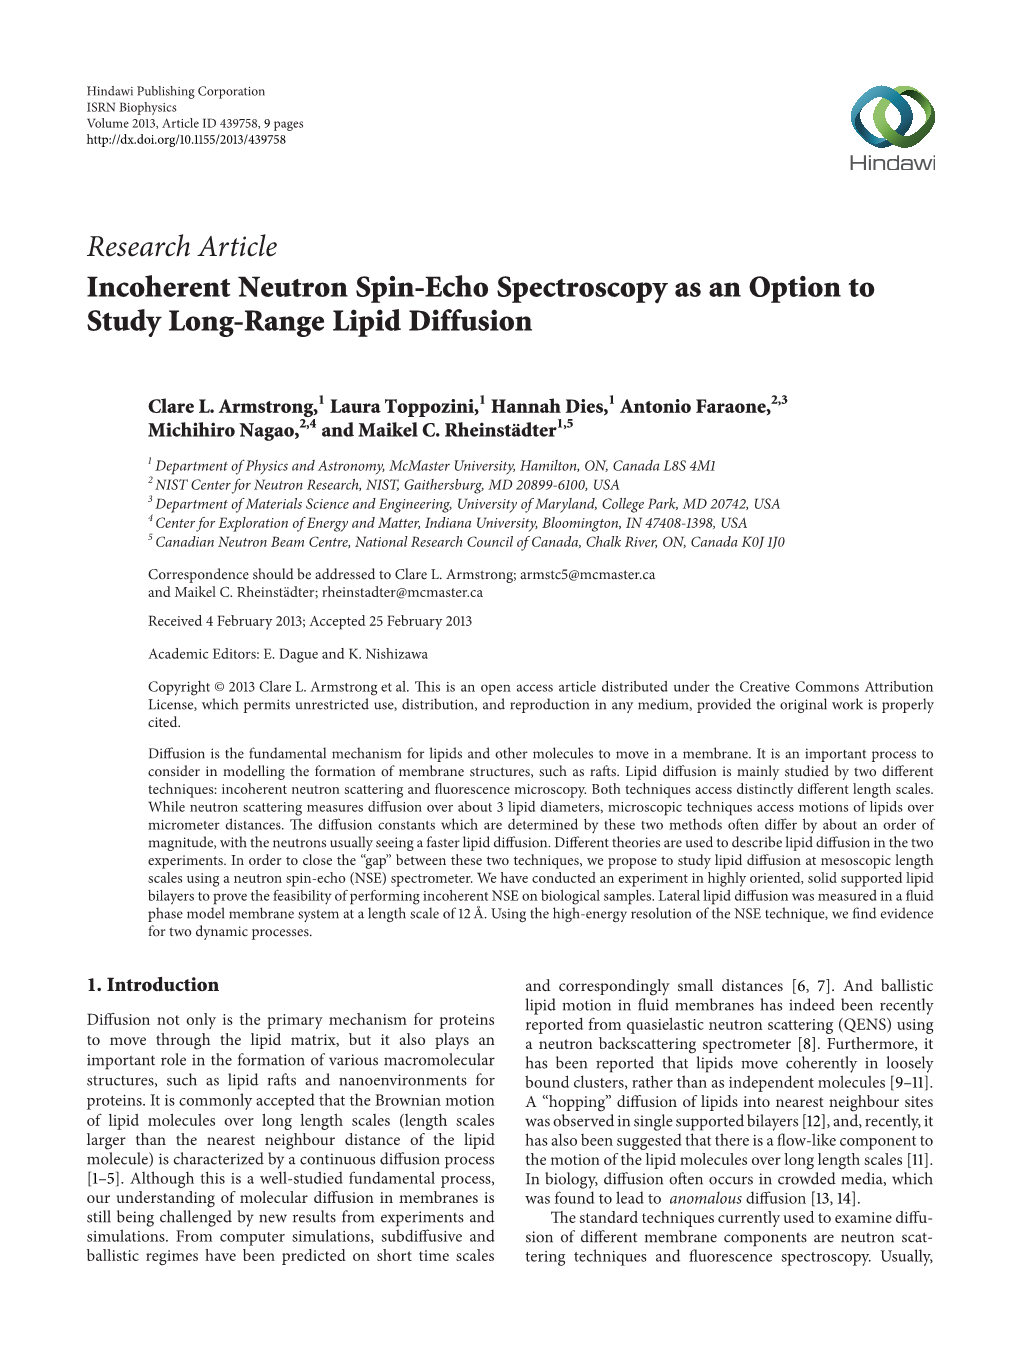 Incoherent Neutron Spin-Echo Spectroscopy As an Option to Study Long-Range Lipid Diffusion